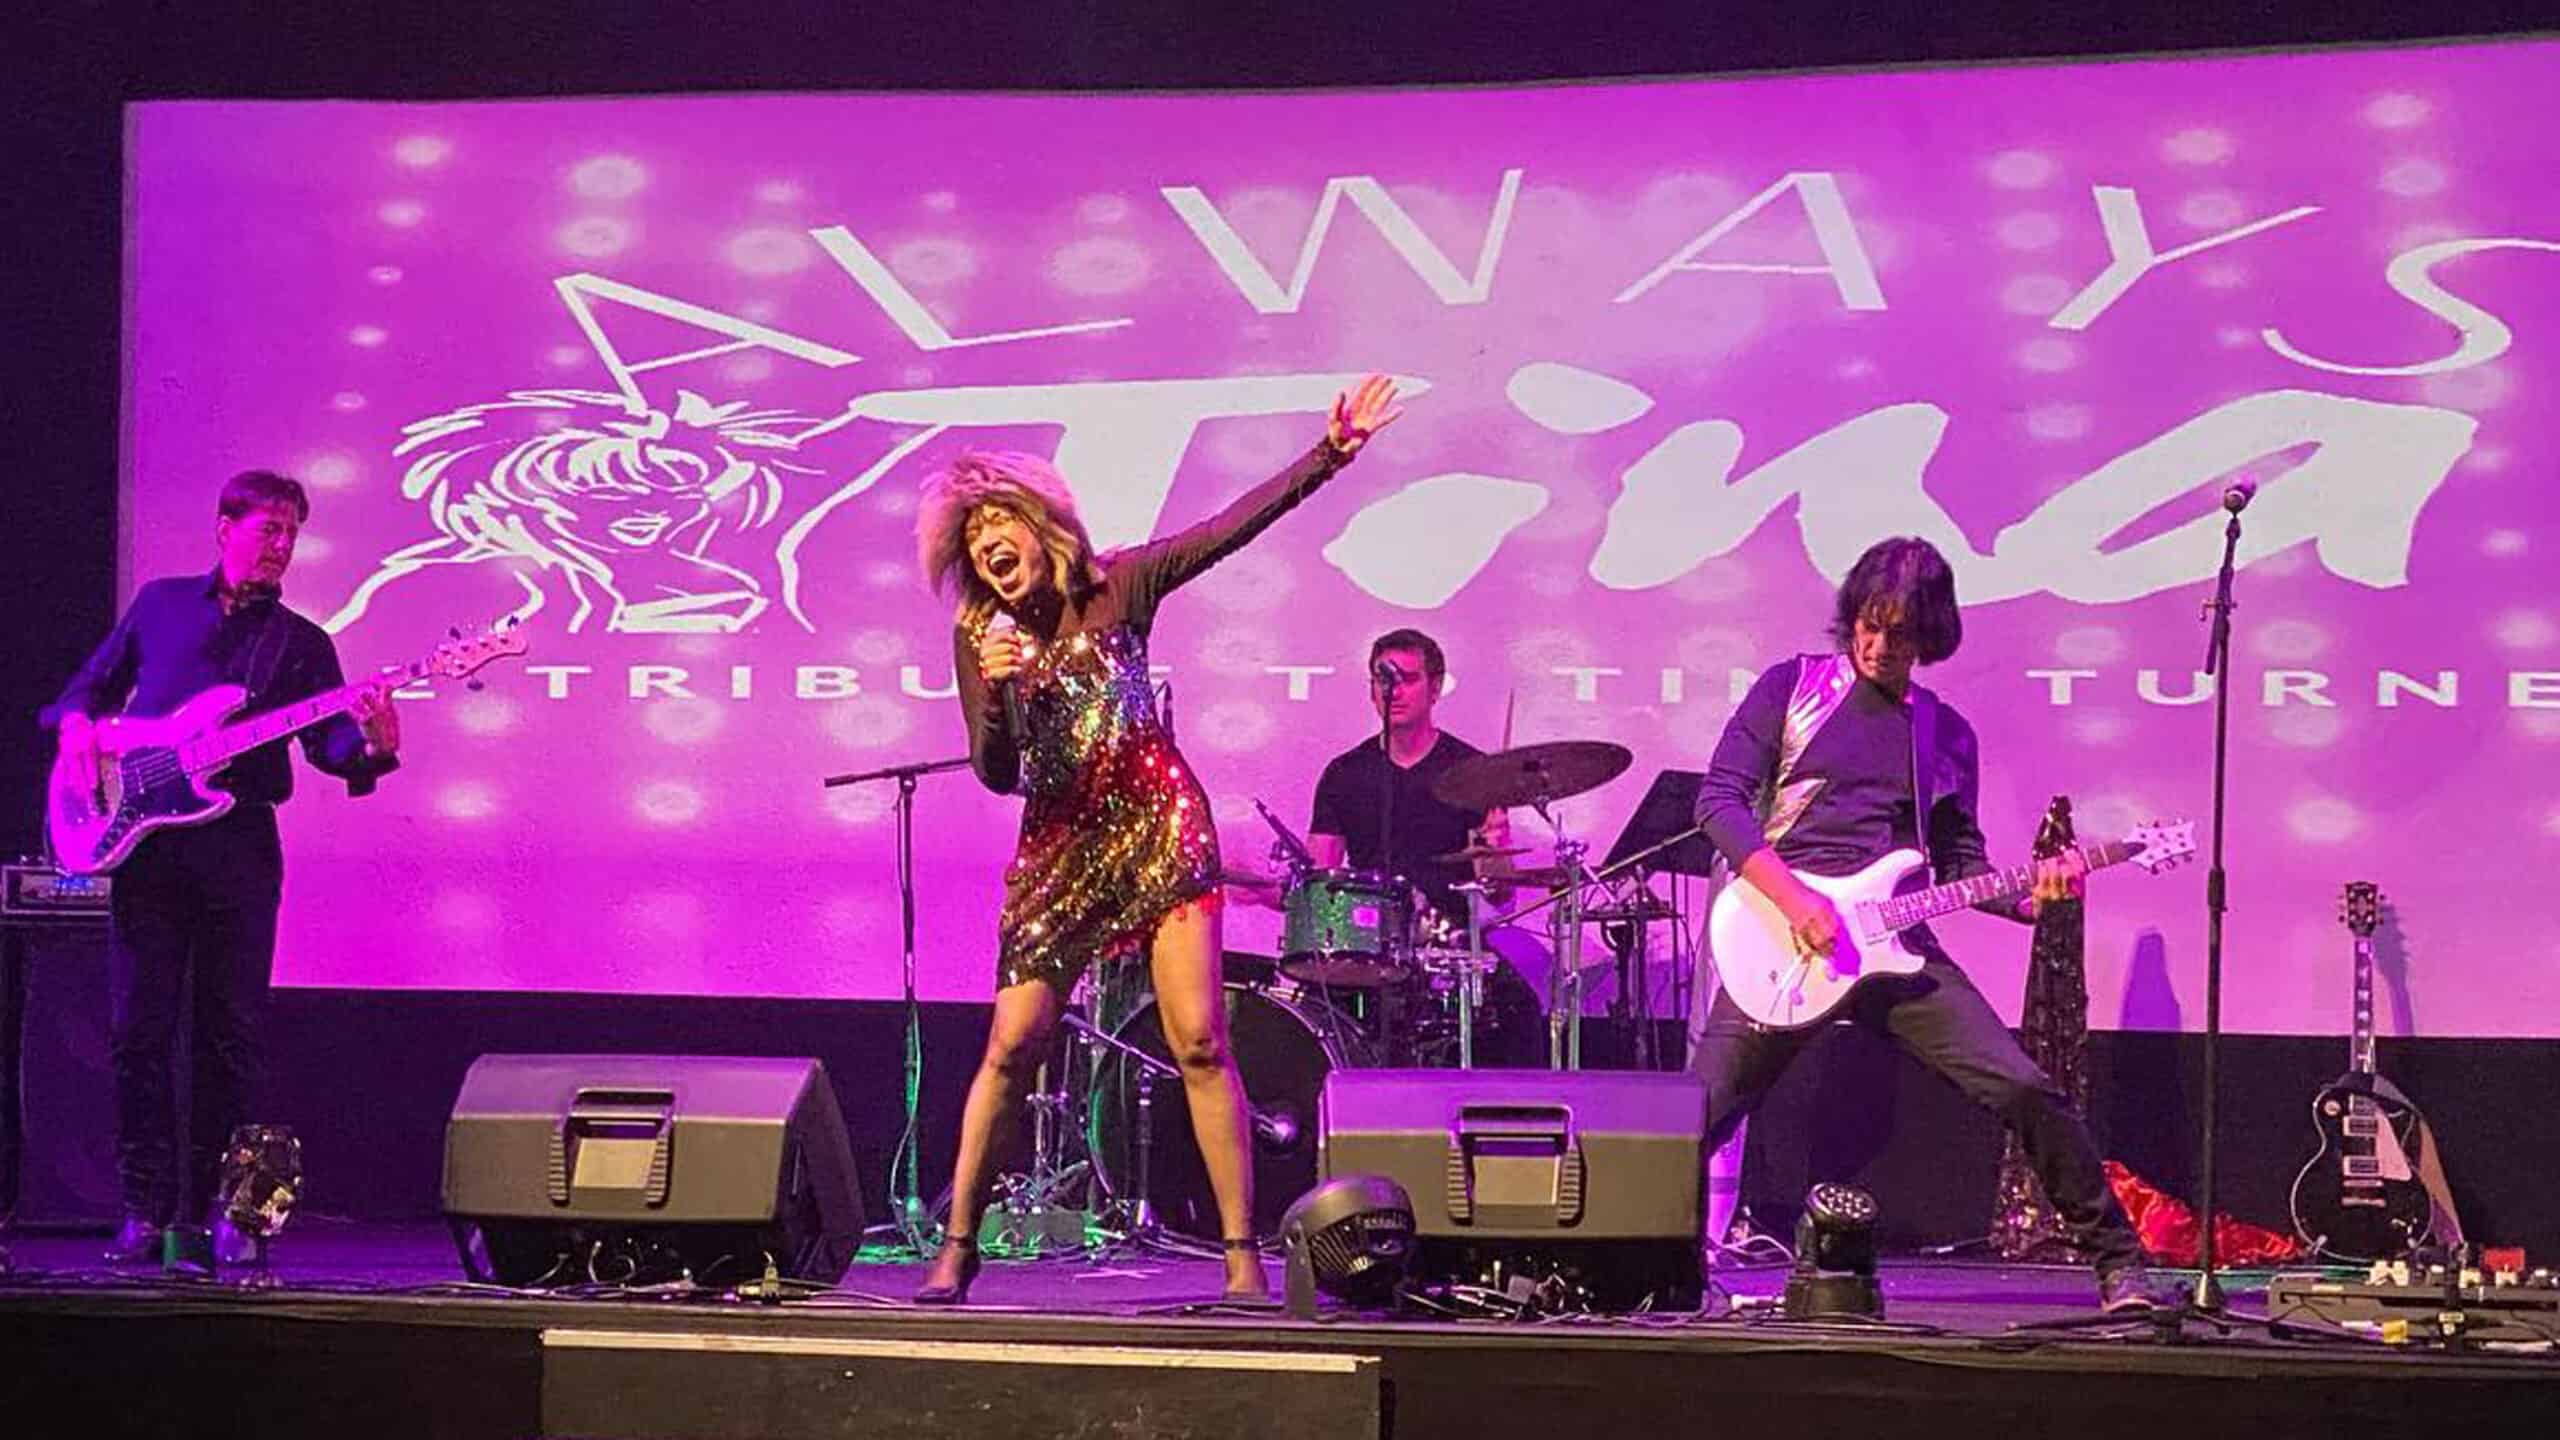 tina turner cover band performing on stage